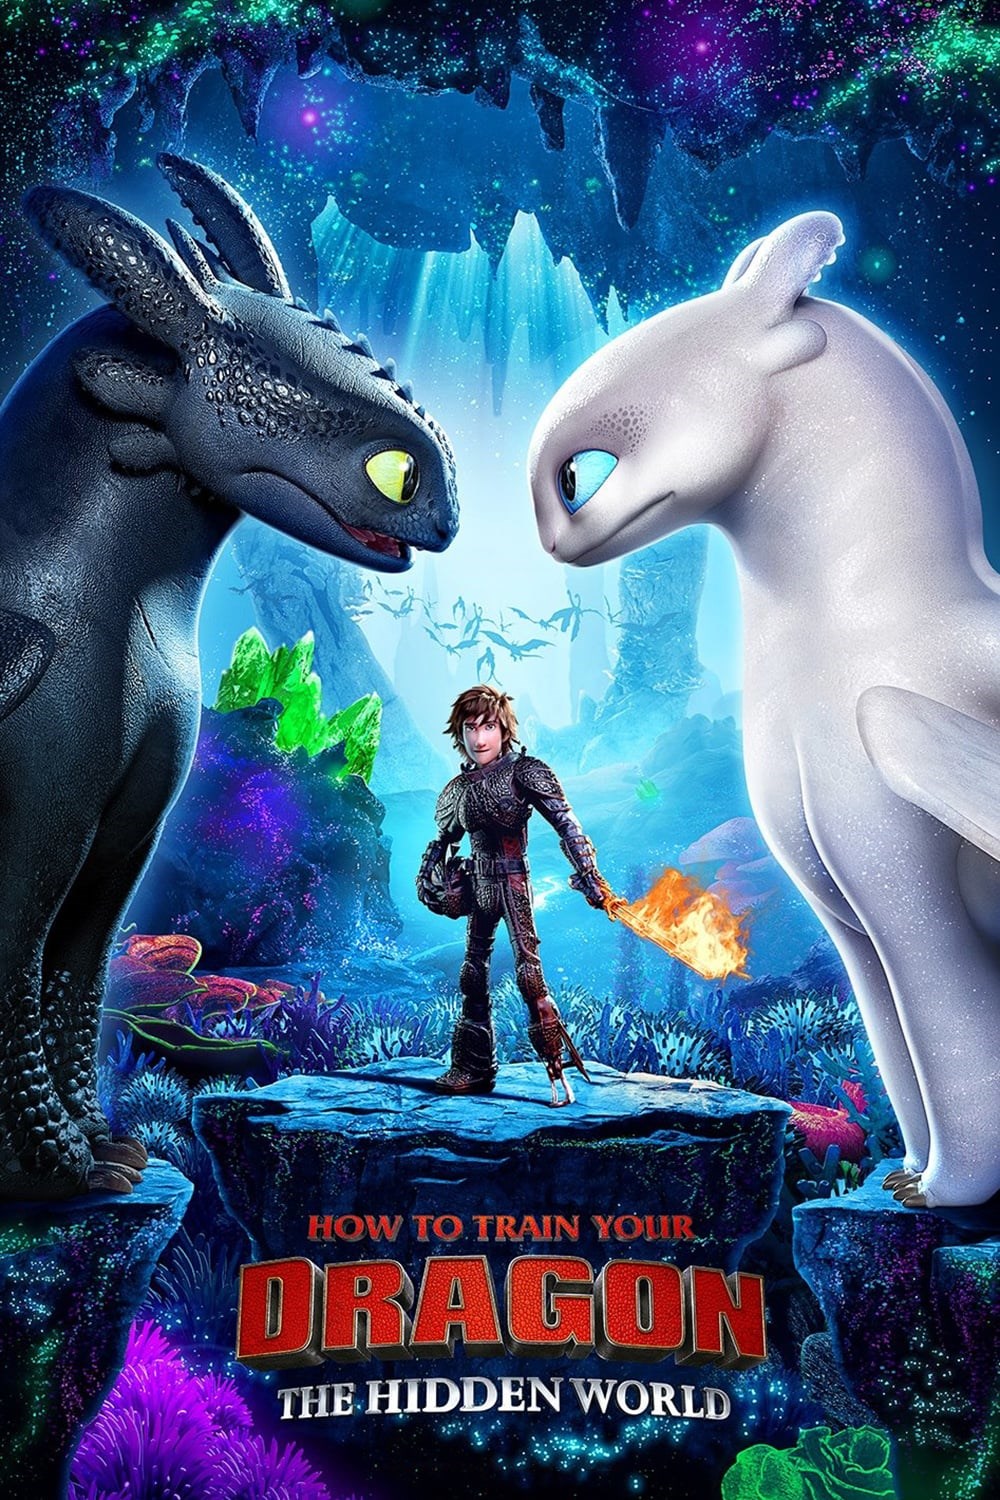 How to train your dragon: the hidden world 2019